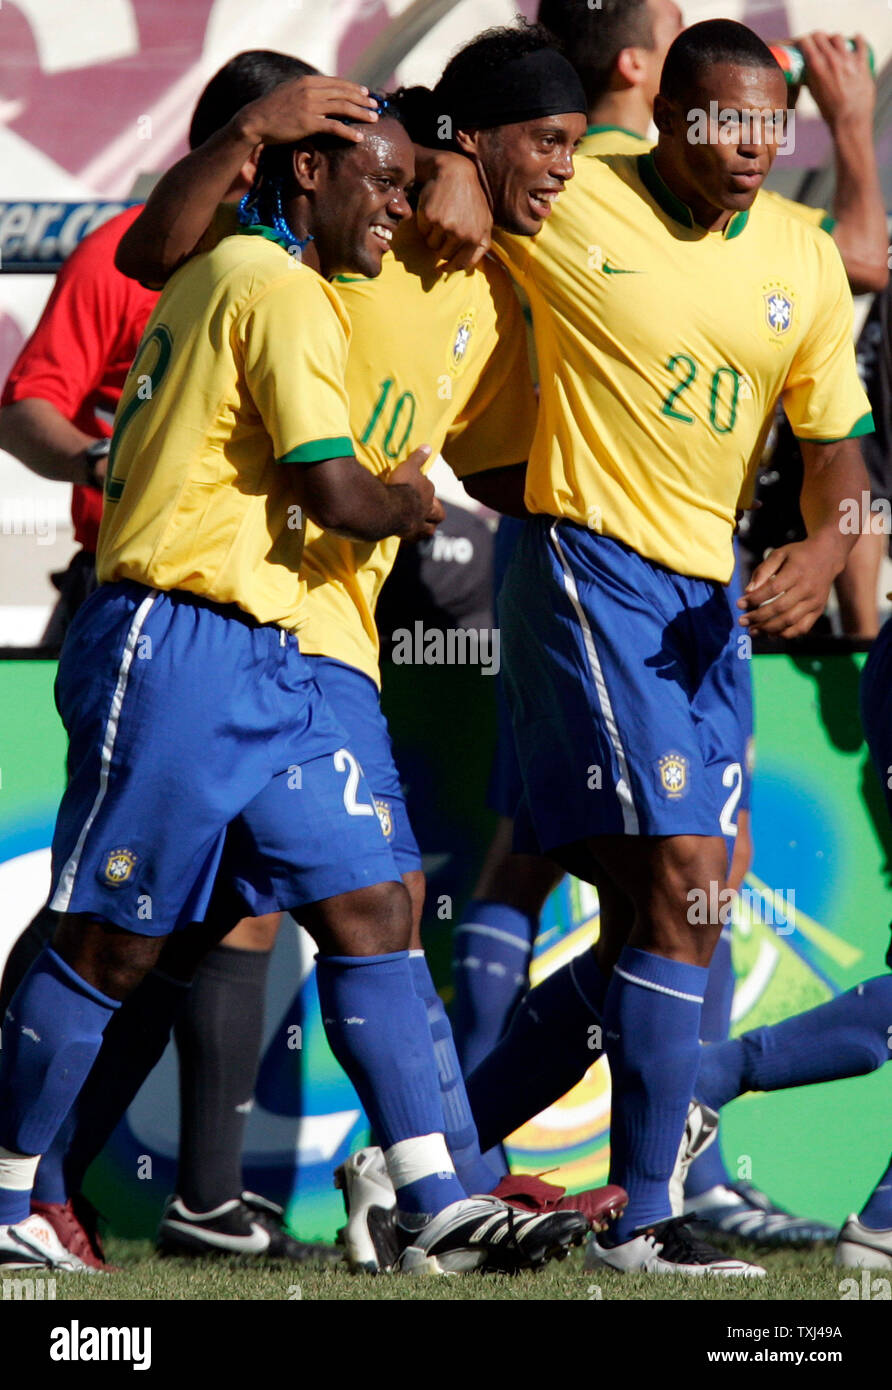 Brazil midfielder Ronaldinho (10) is congratulated by teammates Vagner Love (22) and Julio Baptista (20) after scoring a goal against the USA in their international friendly soccer match at Soldier Field in Chicago, September 9, 2007. Brazil defeated the USA 4-2.  (UPI Photo/Mark Cowan) Stock Photo